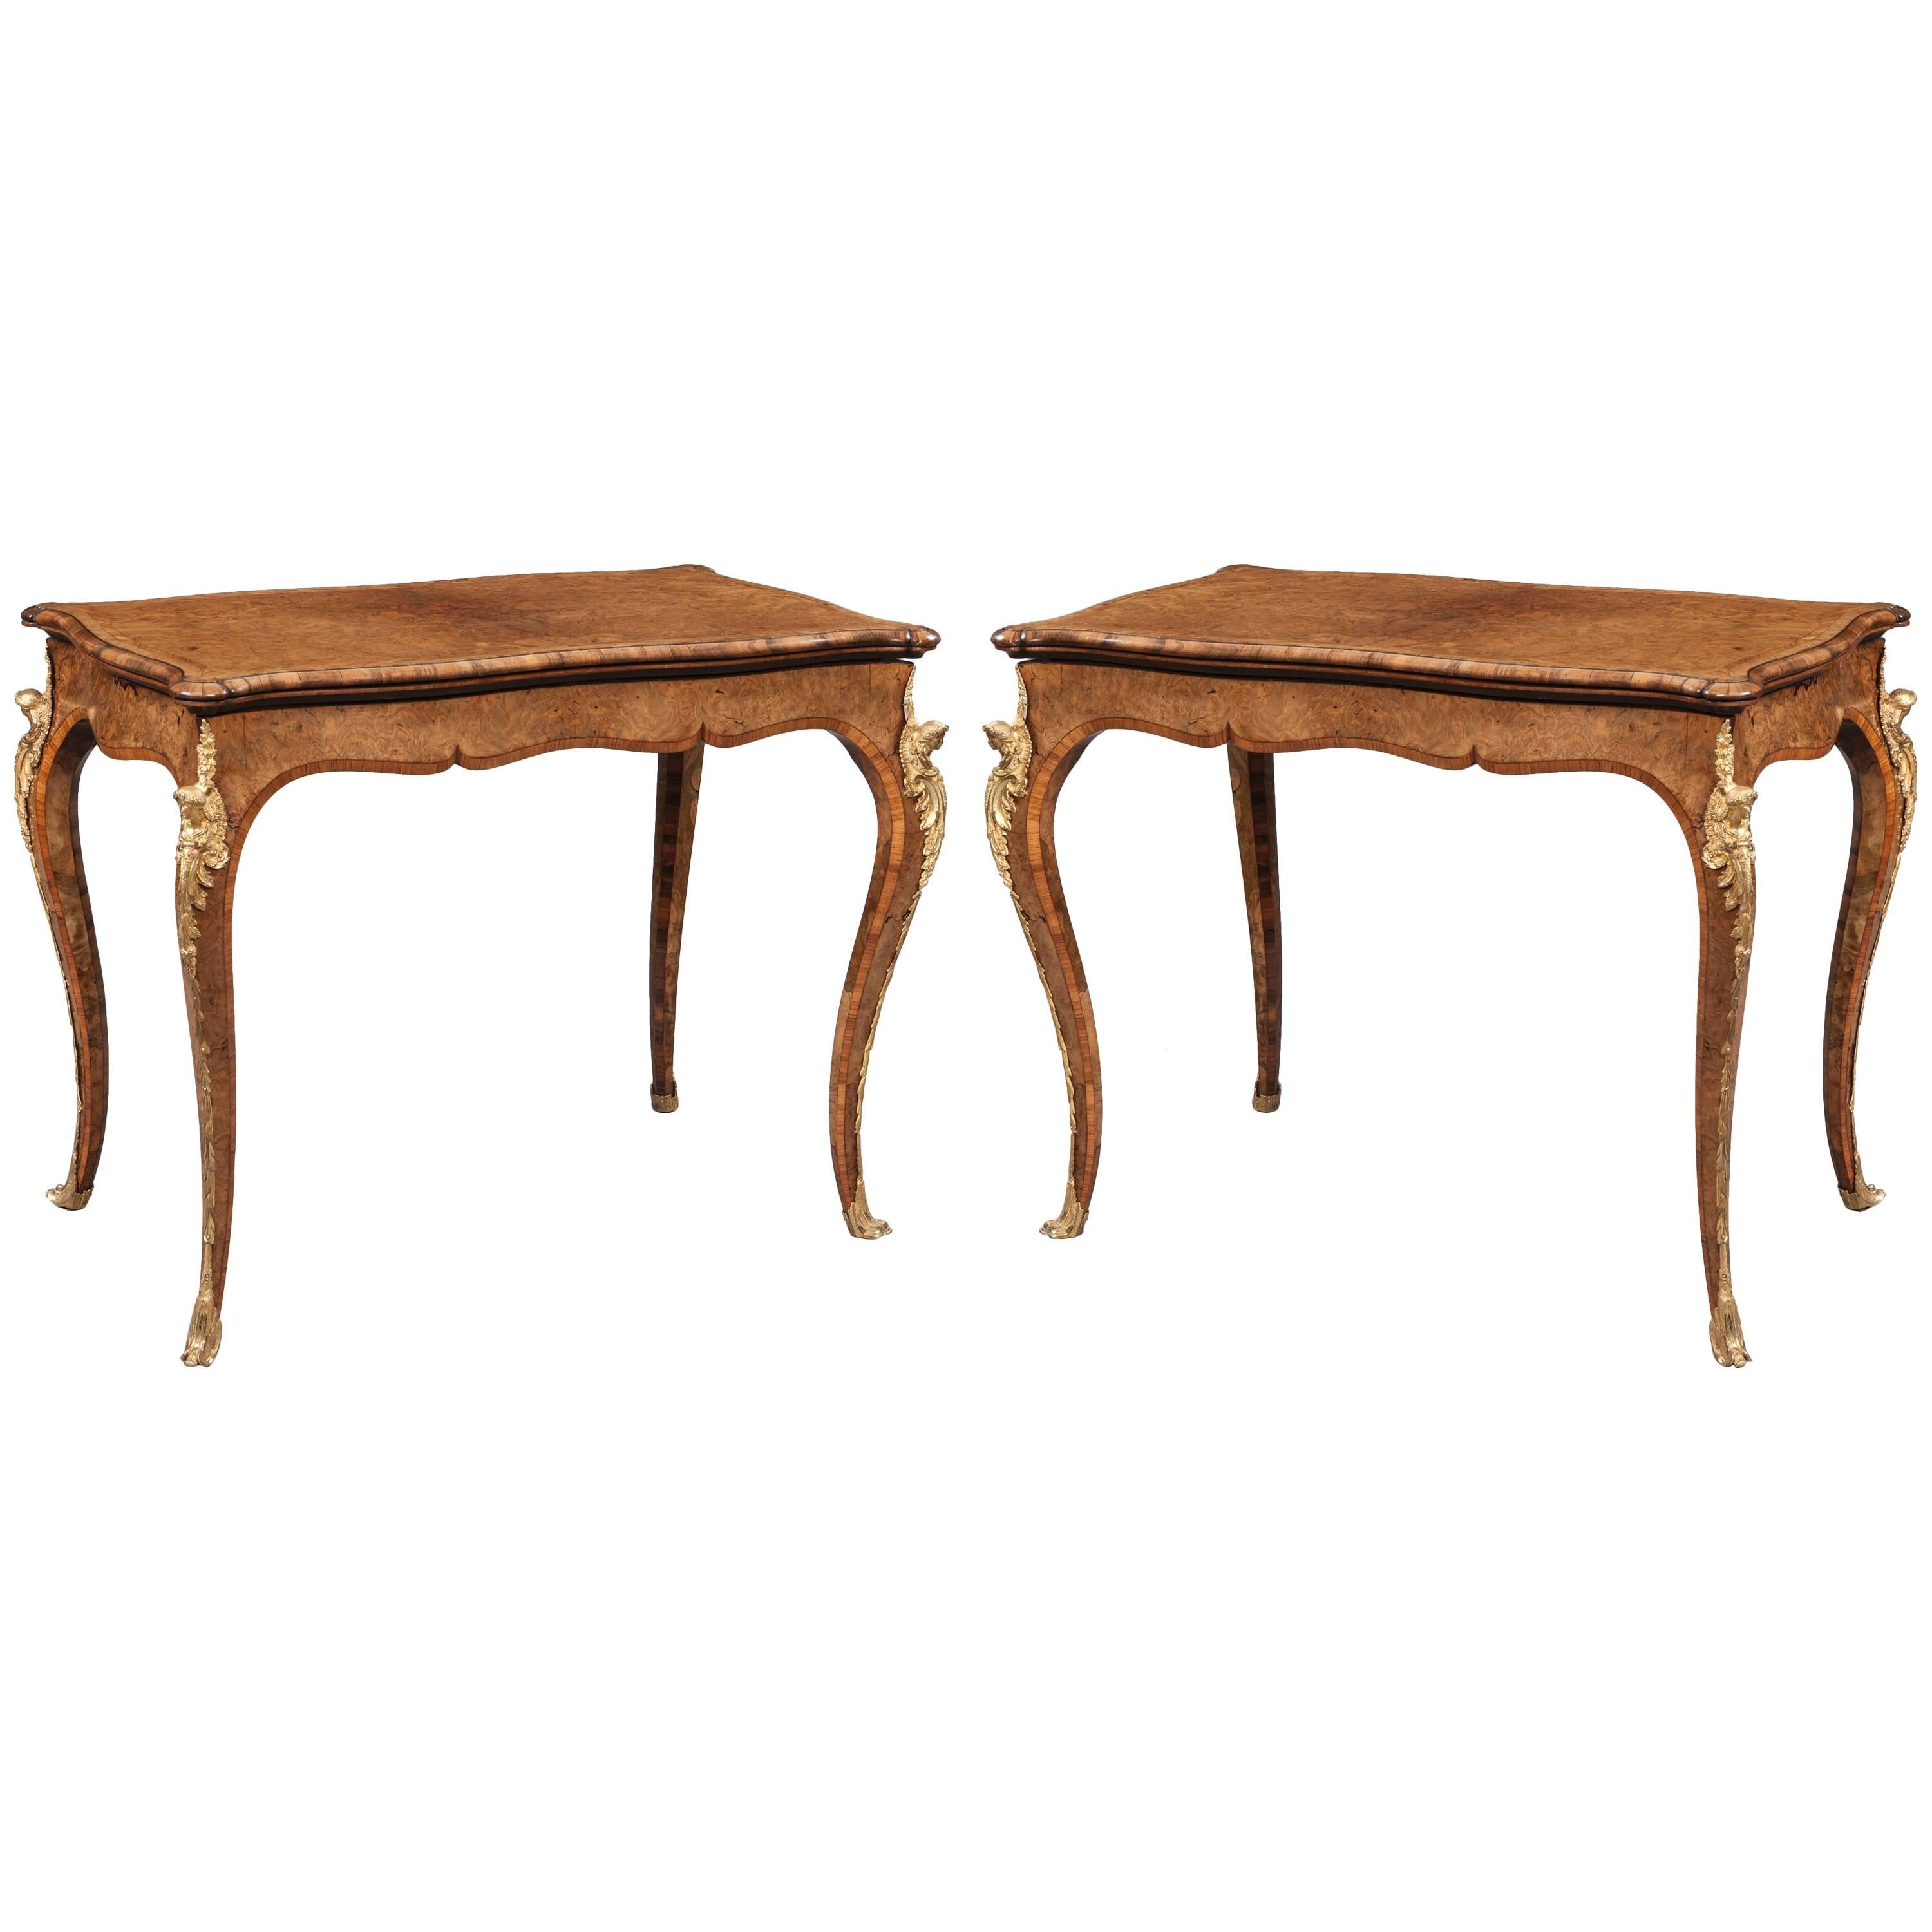 Pair of English Burr Walnut Card Tables Attributed to Gillows of Lancaster For Sale